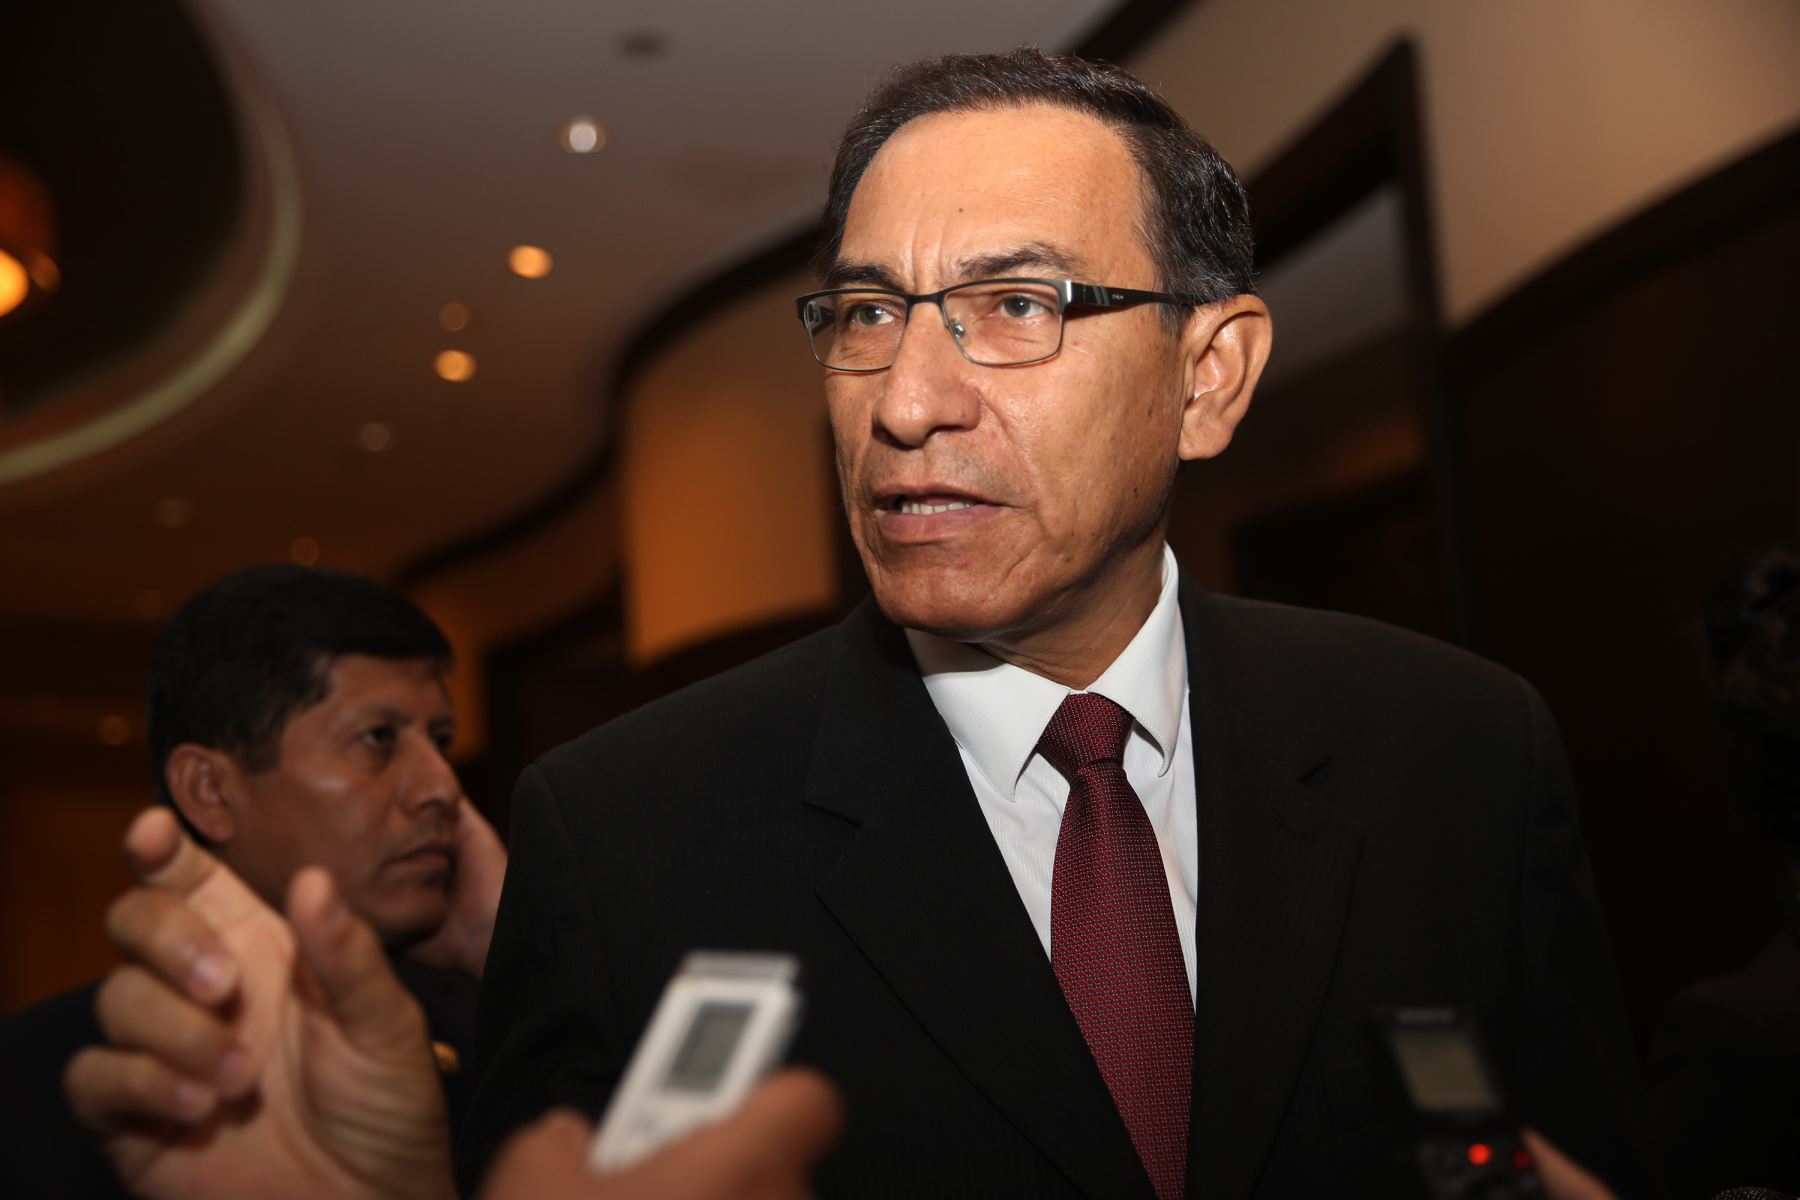 The prosecution also requested against Martín Vizcarra 9 years of disqualification from holding public office.